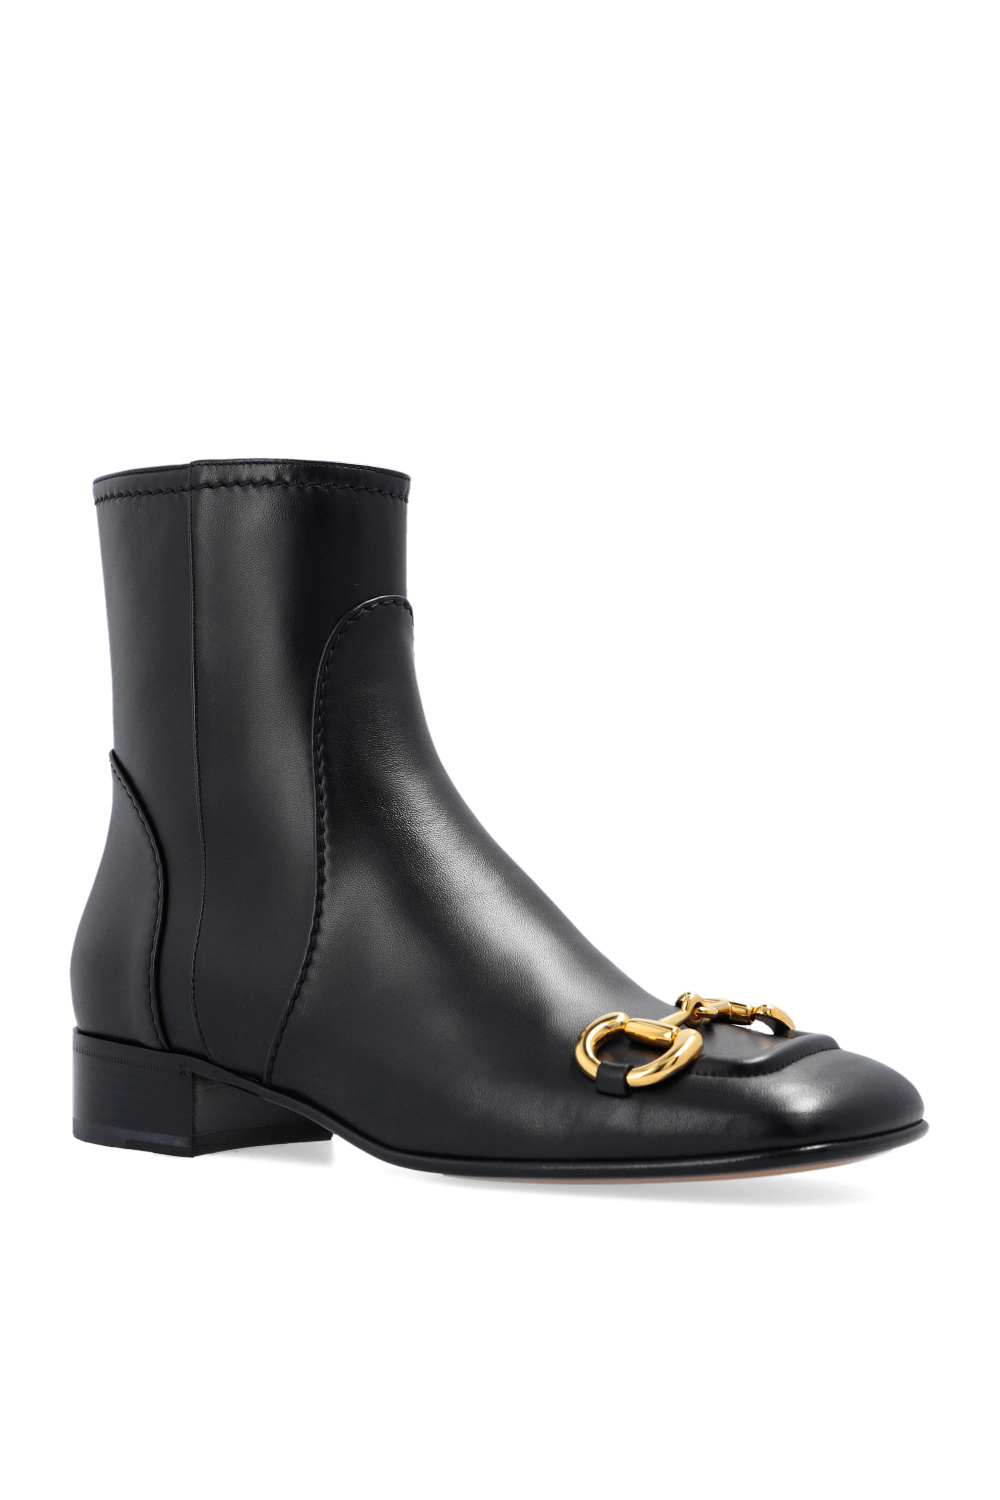 Gucci ‘Charlotte’ ankle boots